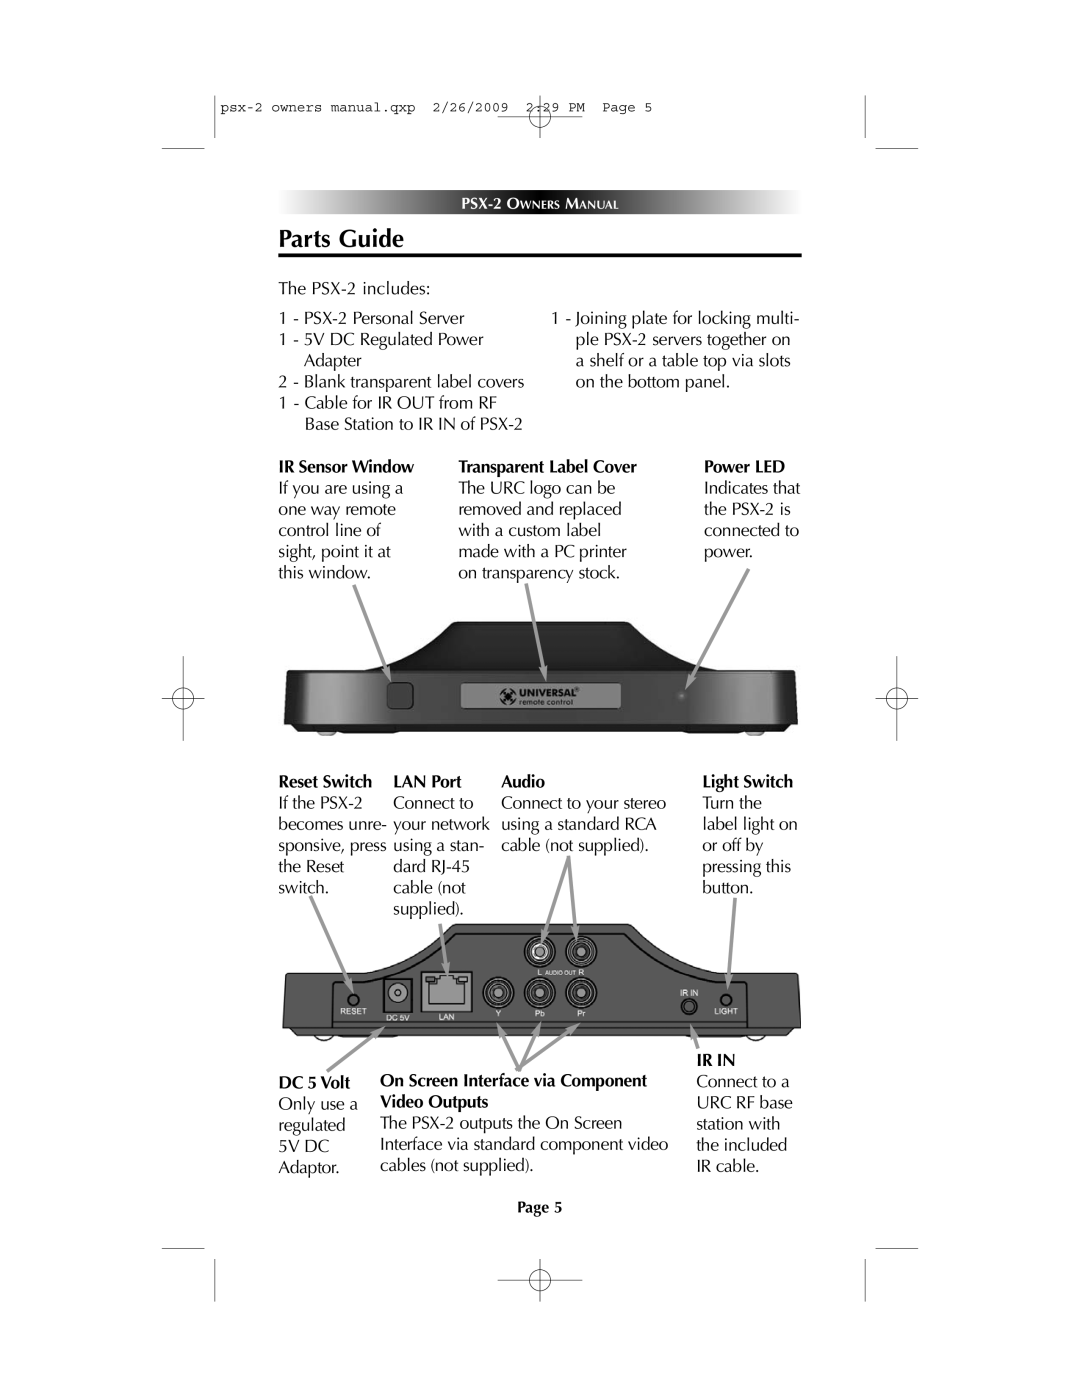 Universal PSX-2 owner manual Parts Guide, Transparent Label Cover, Power LED, Reset Switch, LAN Port, Audio 